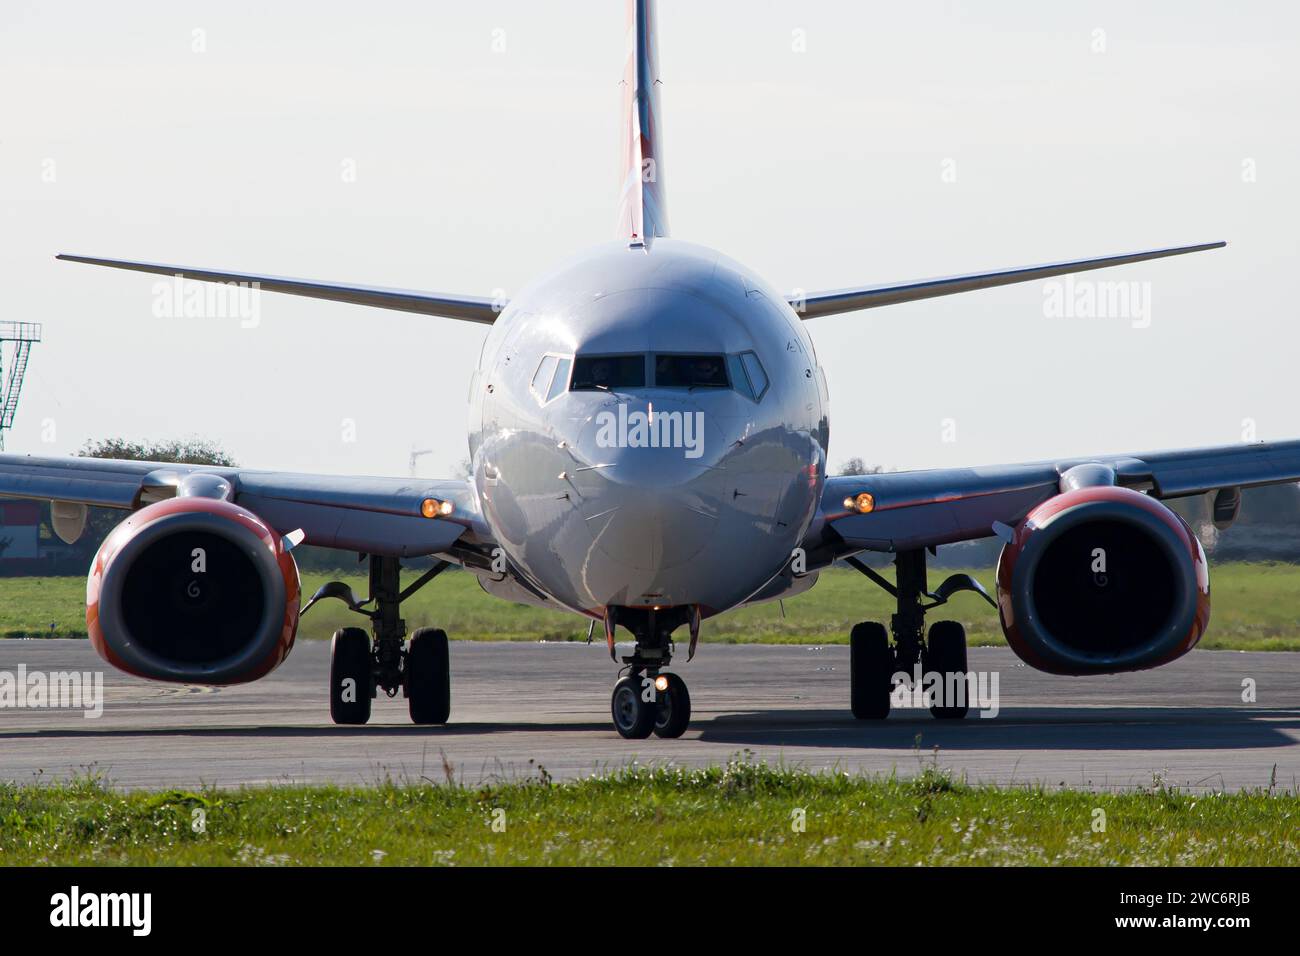 Face-to-face colse-up photo of a passenger commercial aircraft turning around on the runway before takeoff Stock Photo